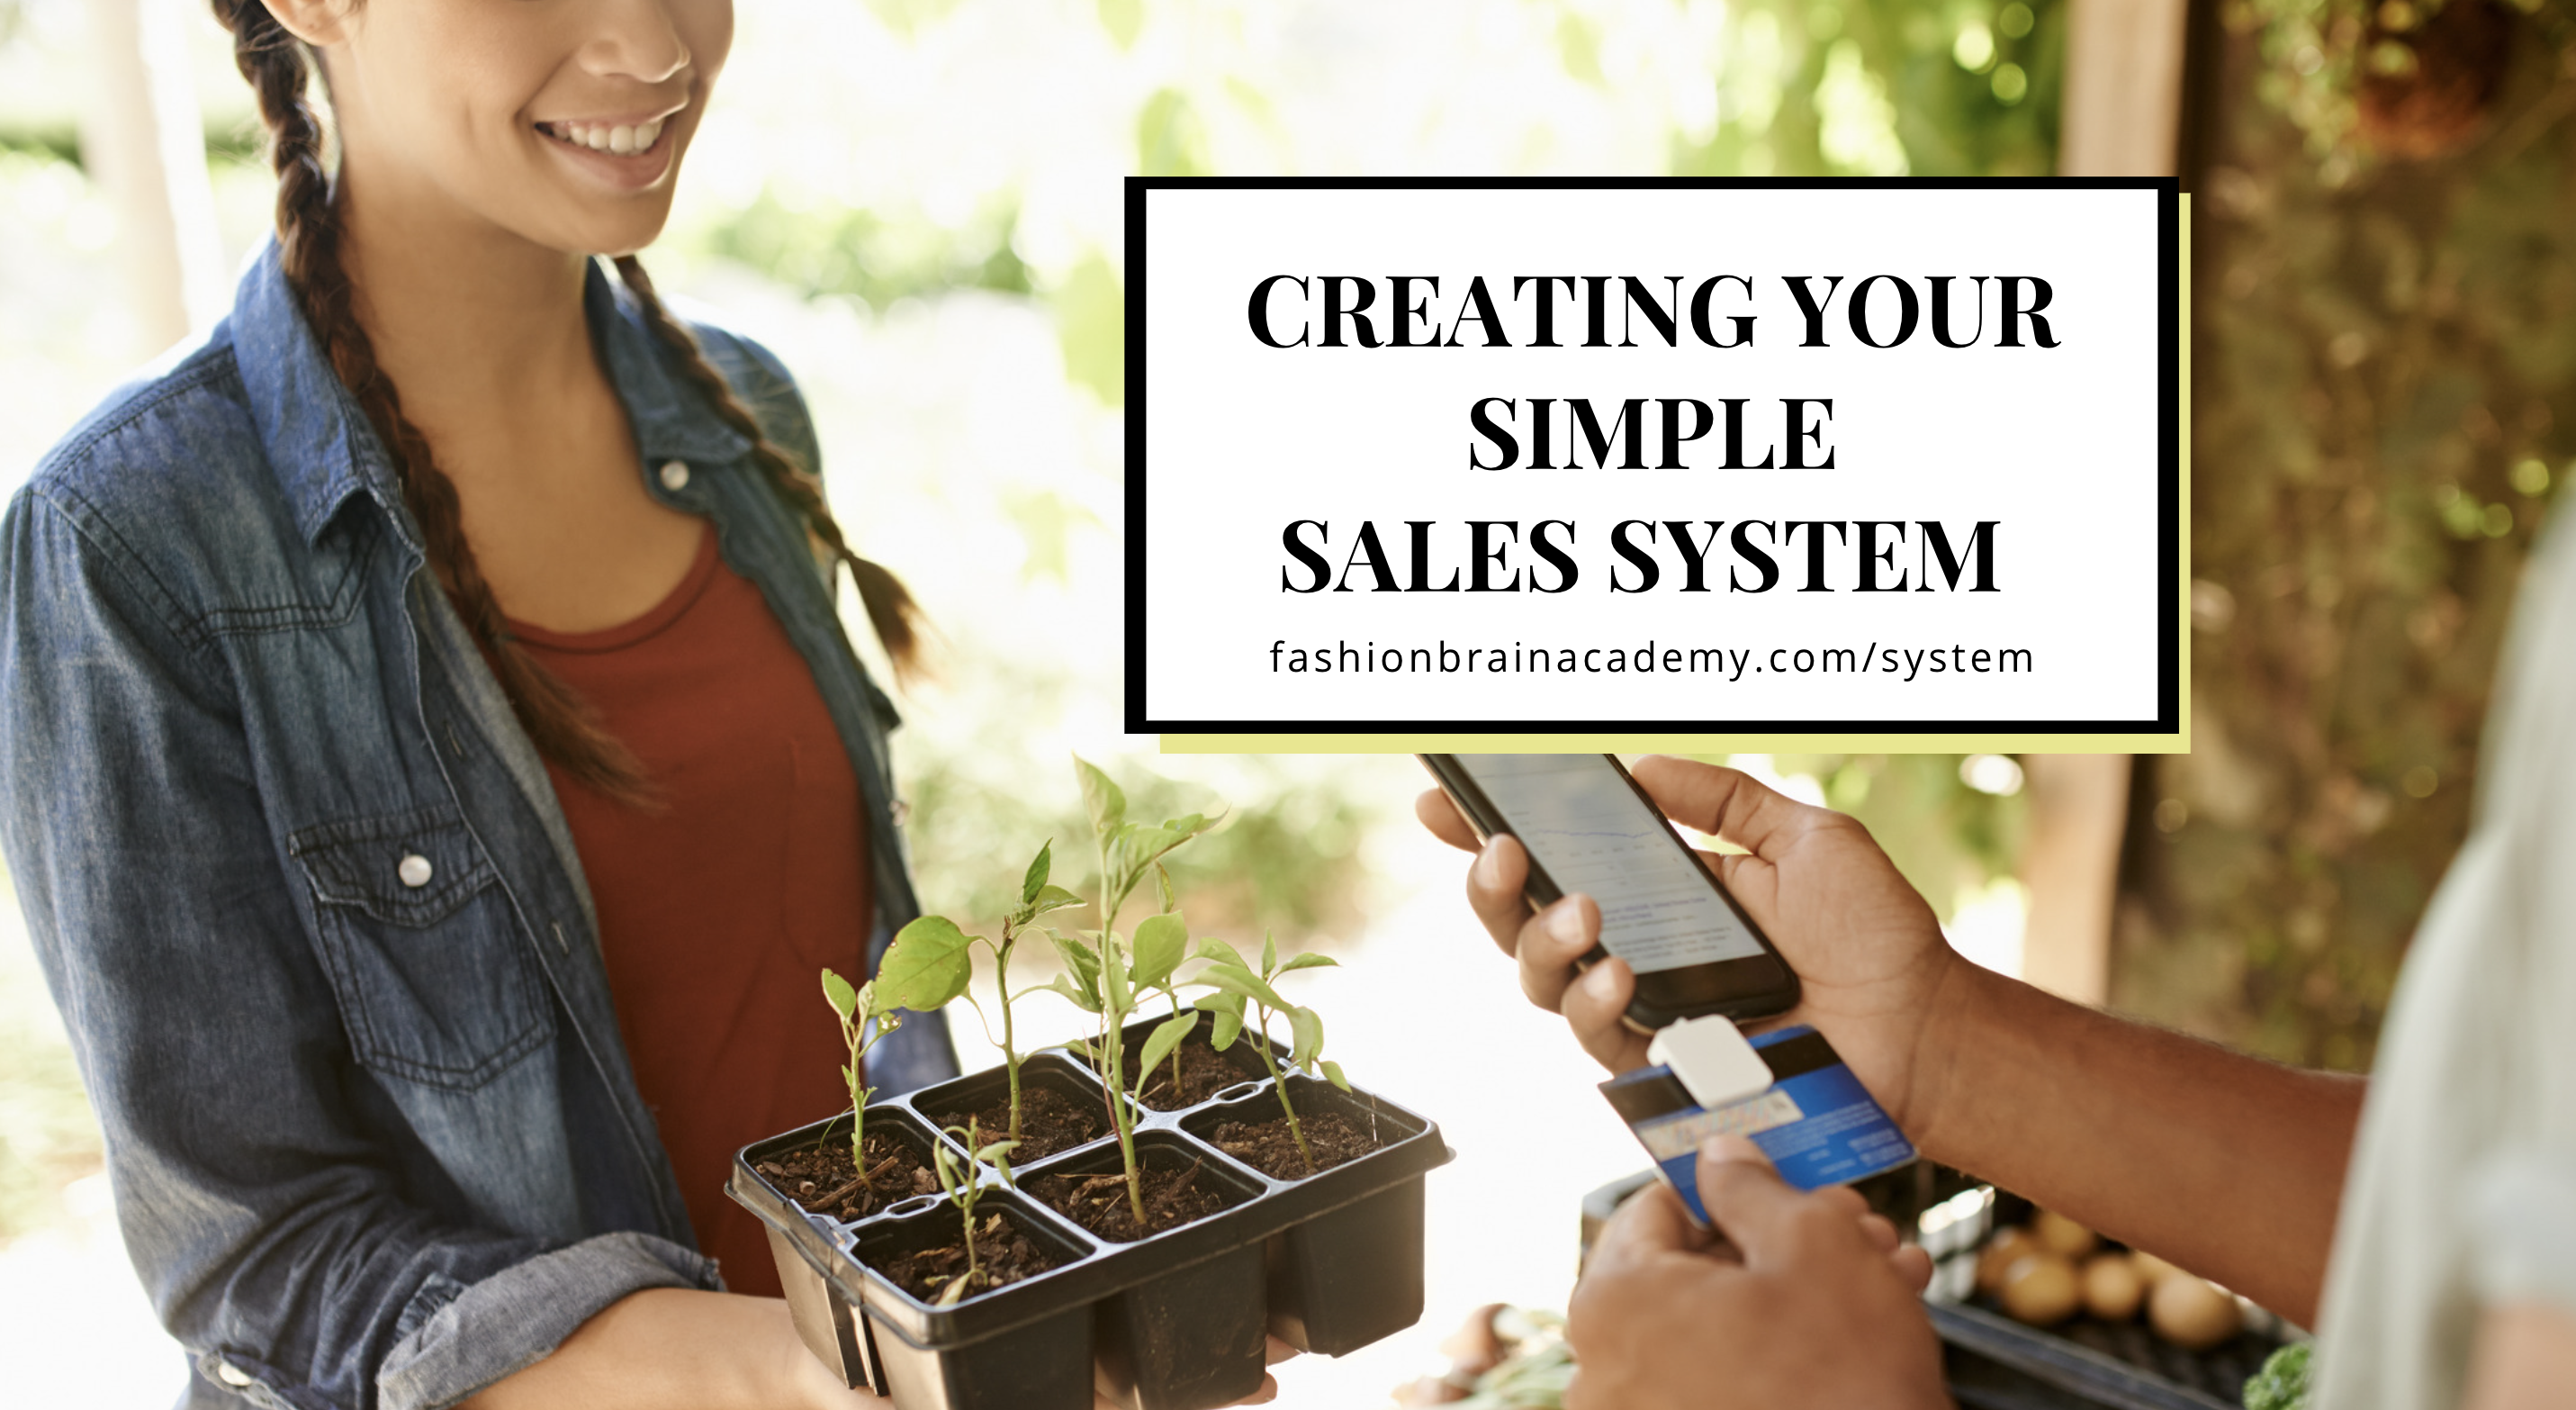 How to create a SIMPLE sales system for your fashion business